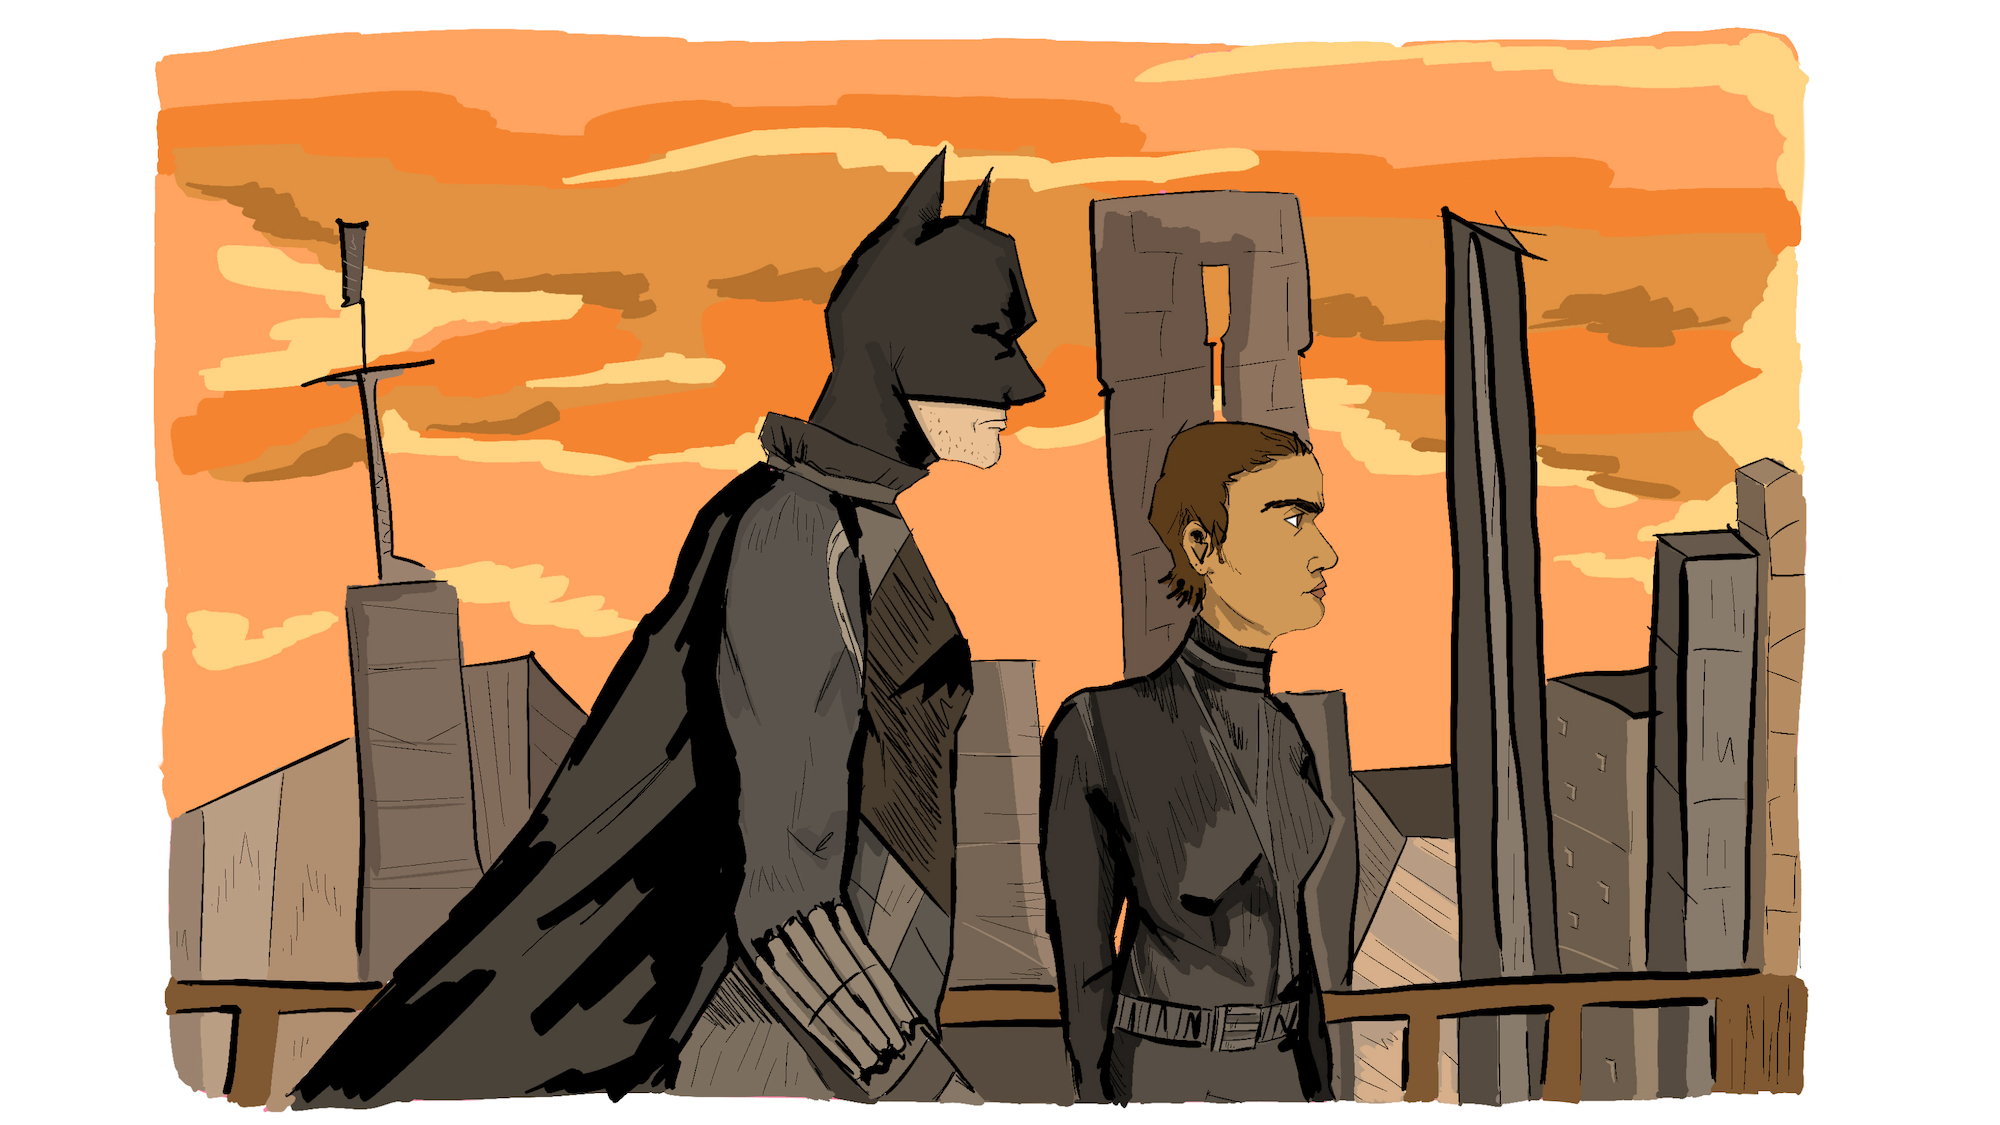 Illustration of Batman and Catwoman backdropped by city buildings.